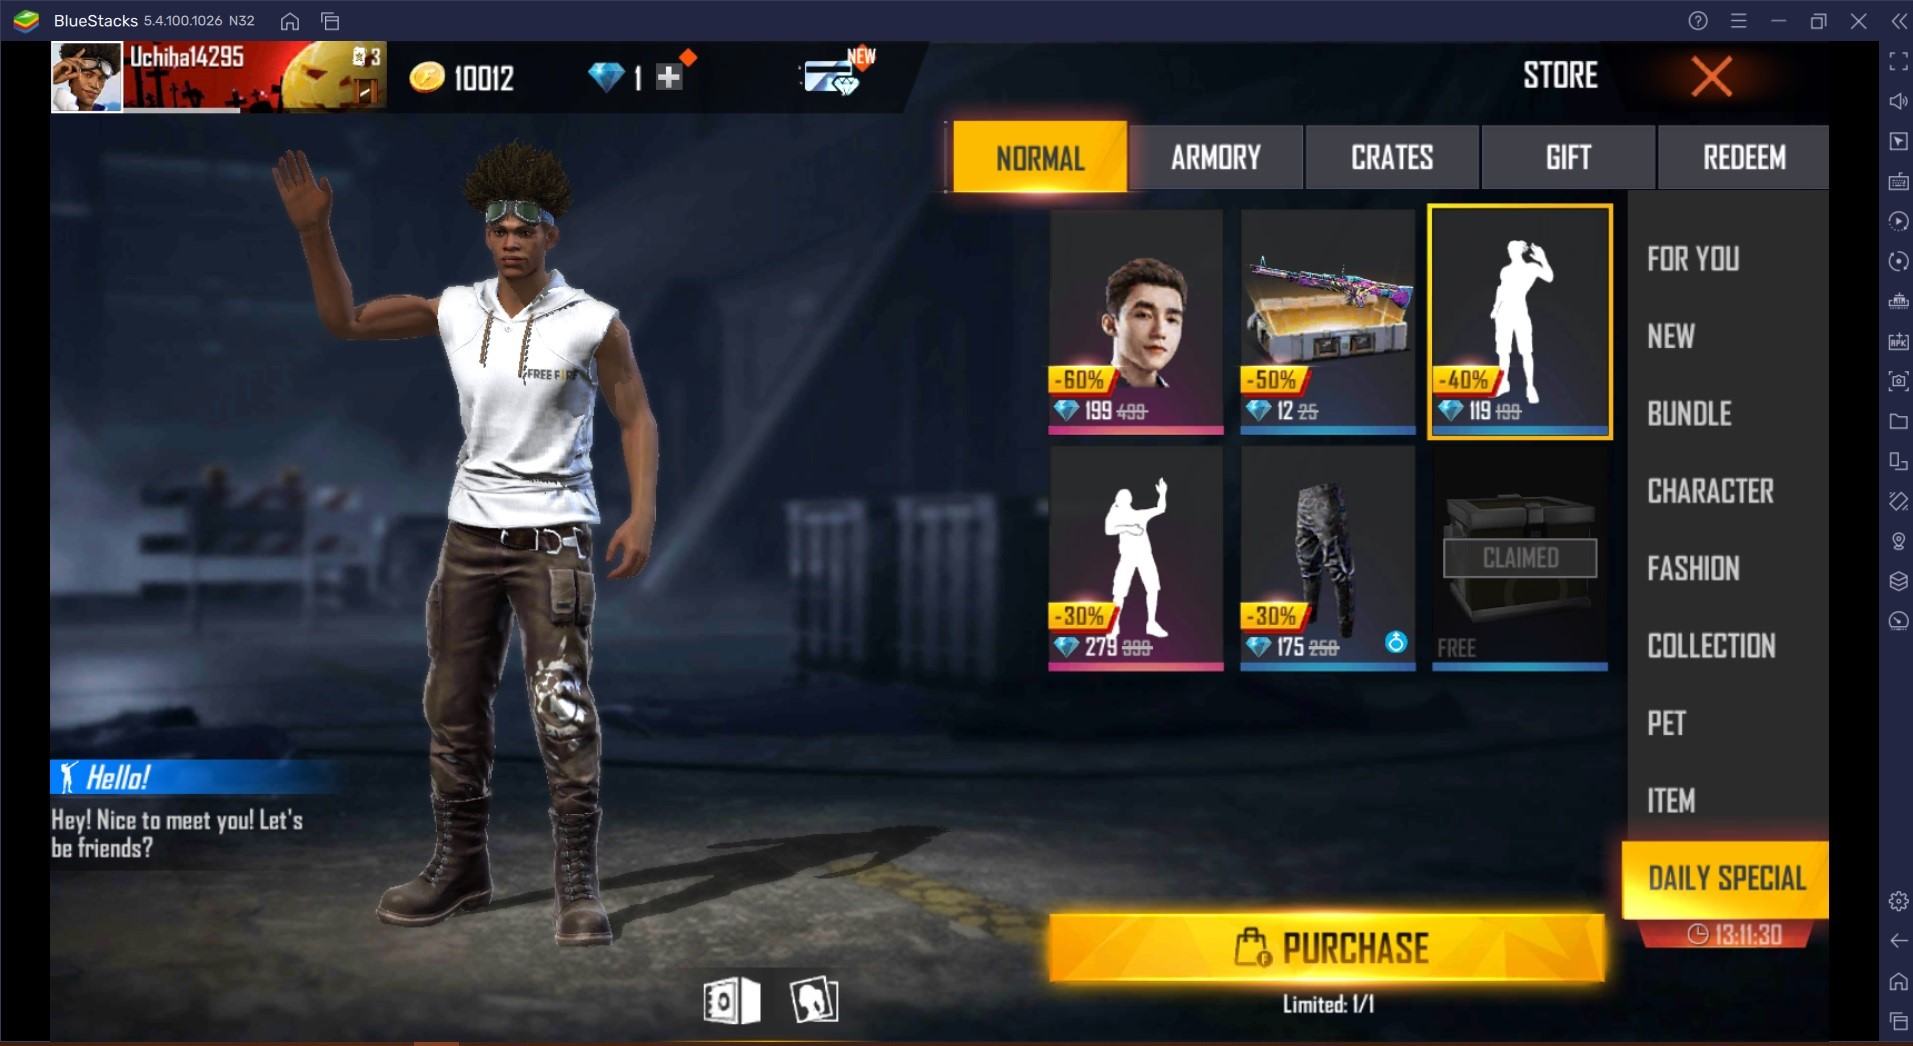 Free Fire Character Skill Guide: Beat the Buzzer with Leon